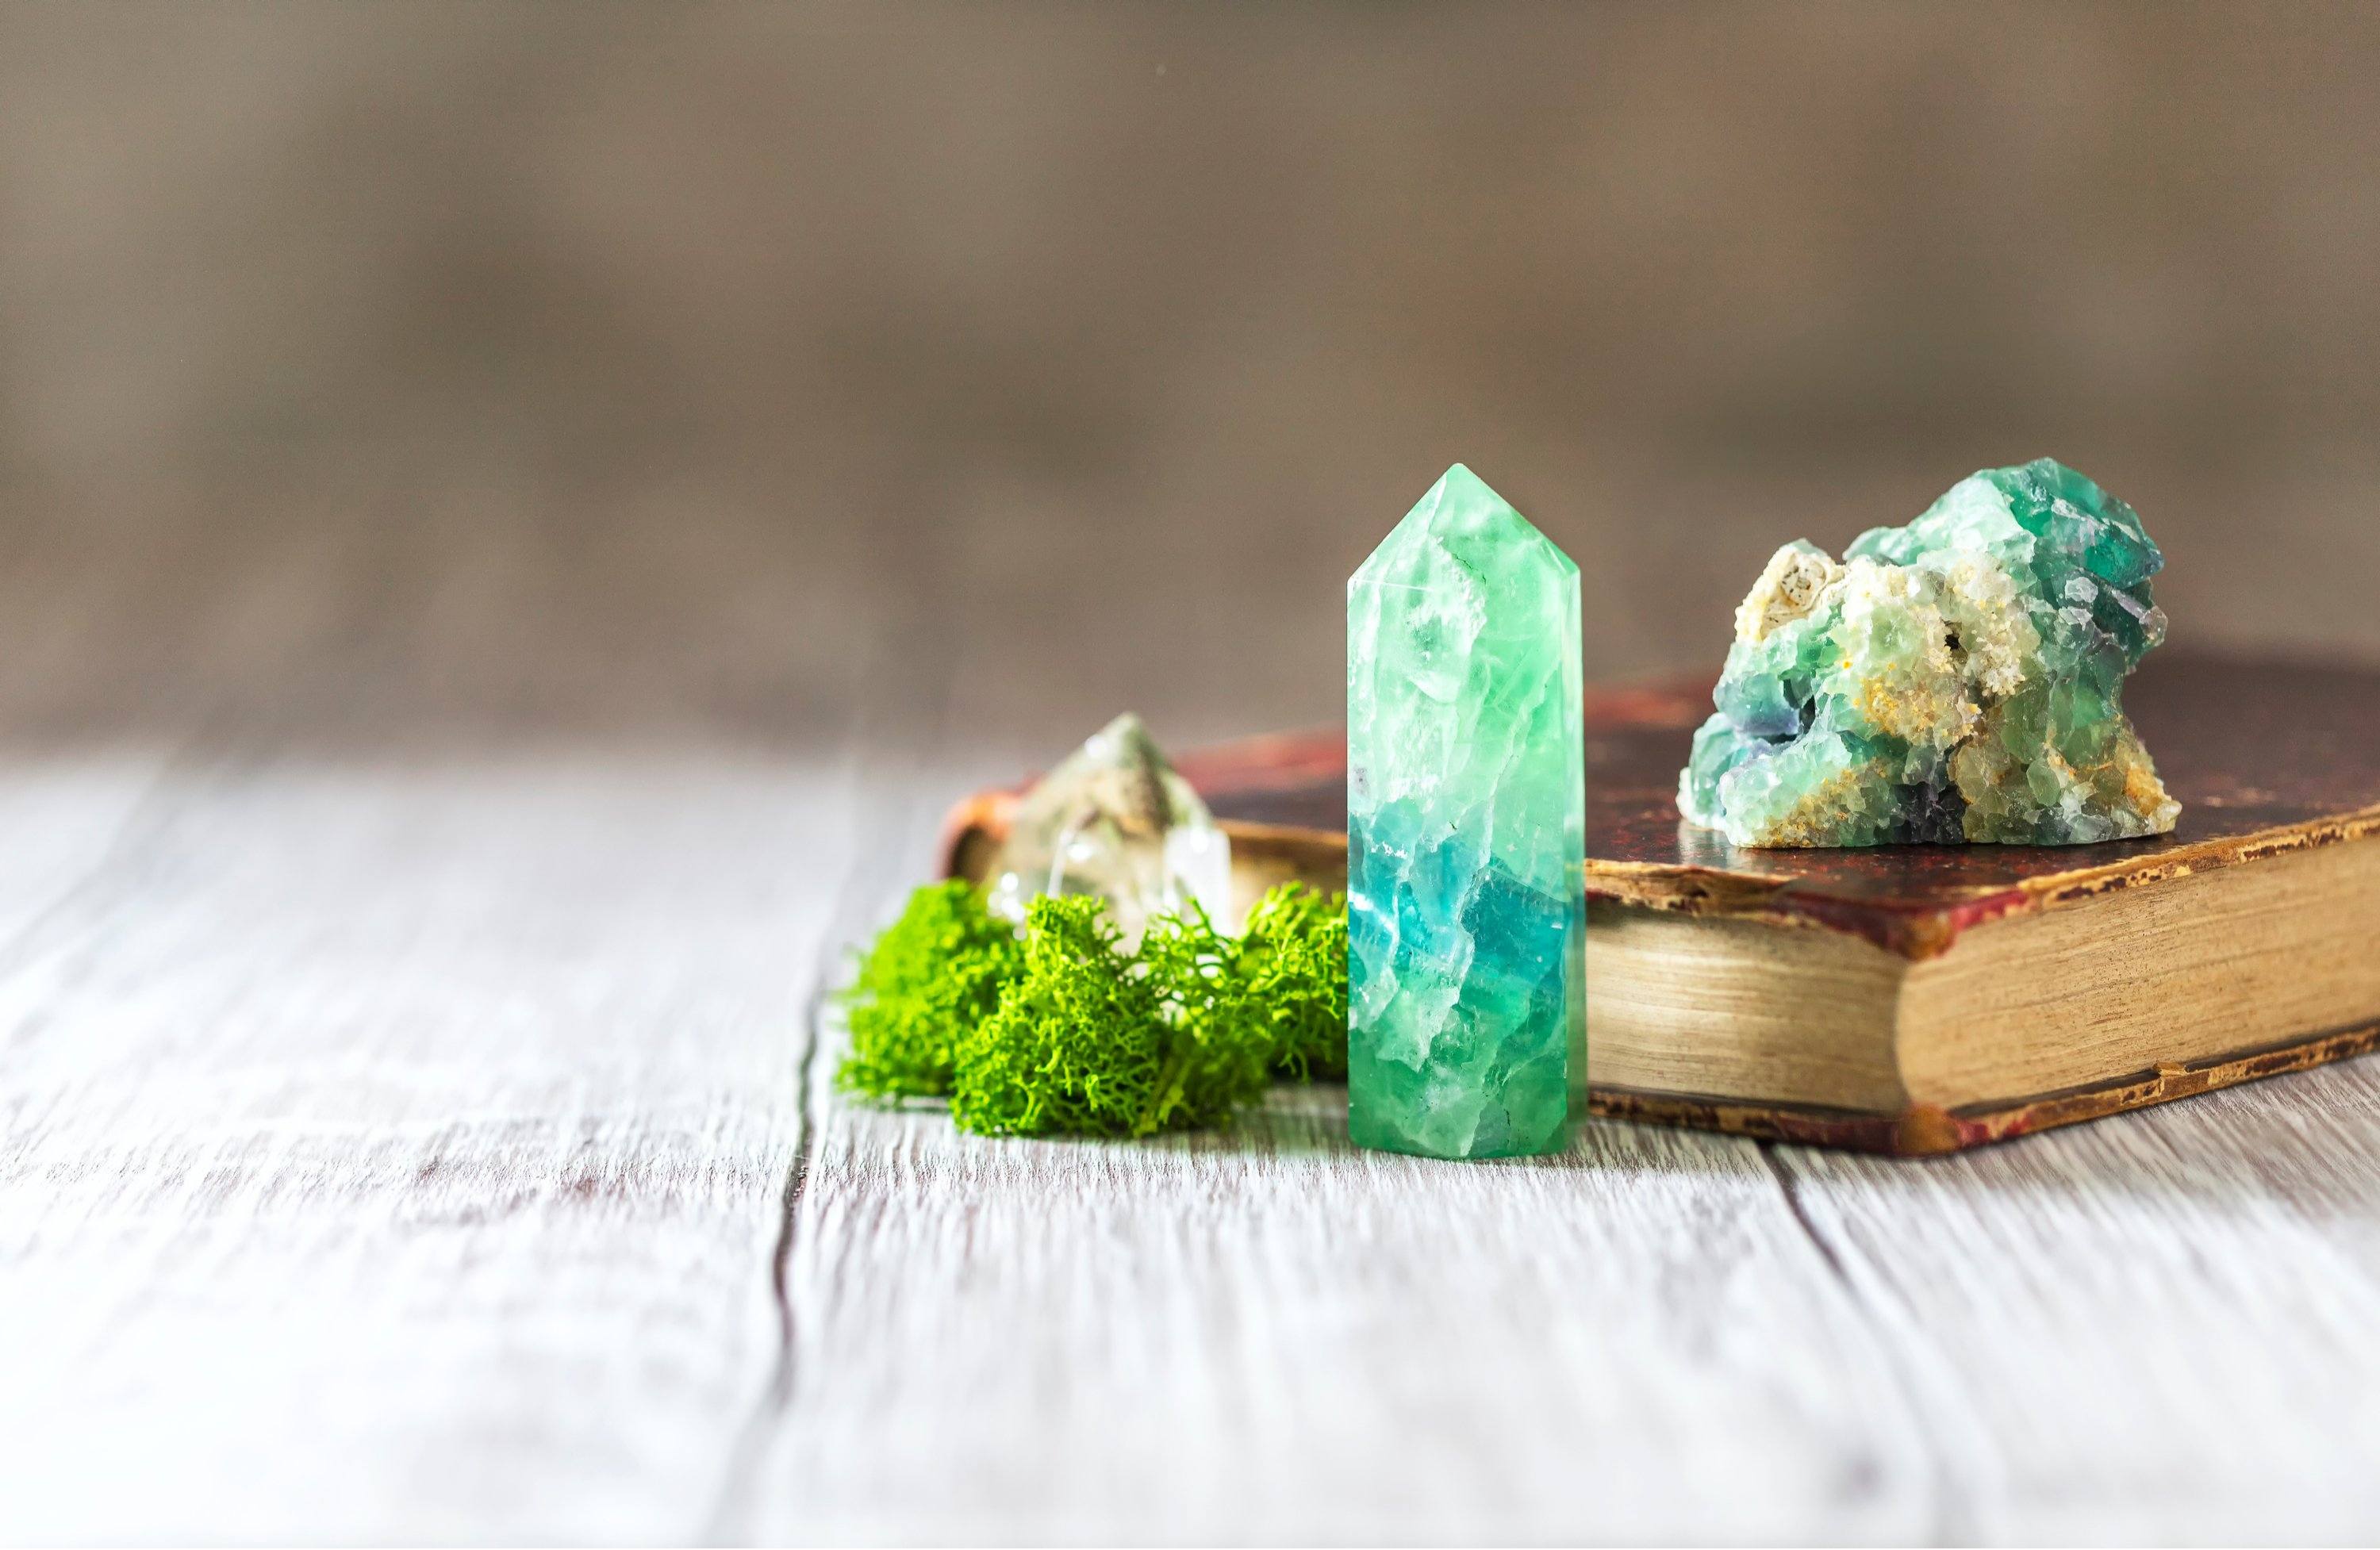 Green Fluorite: The Expert's Guide To Properties, Meaning, and Healing Uses